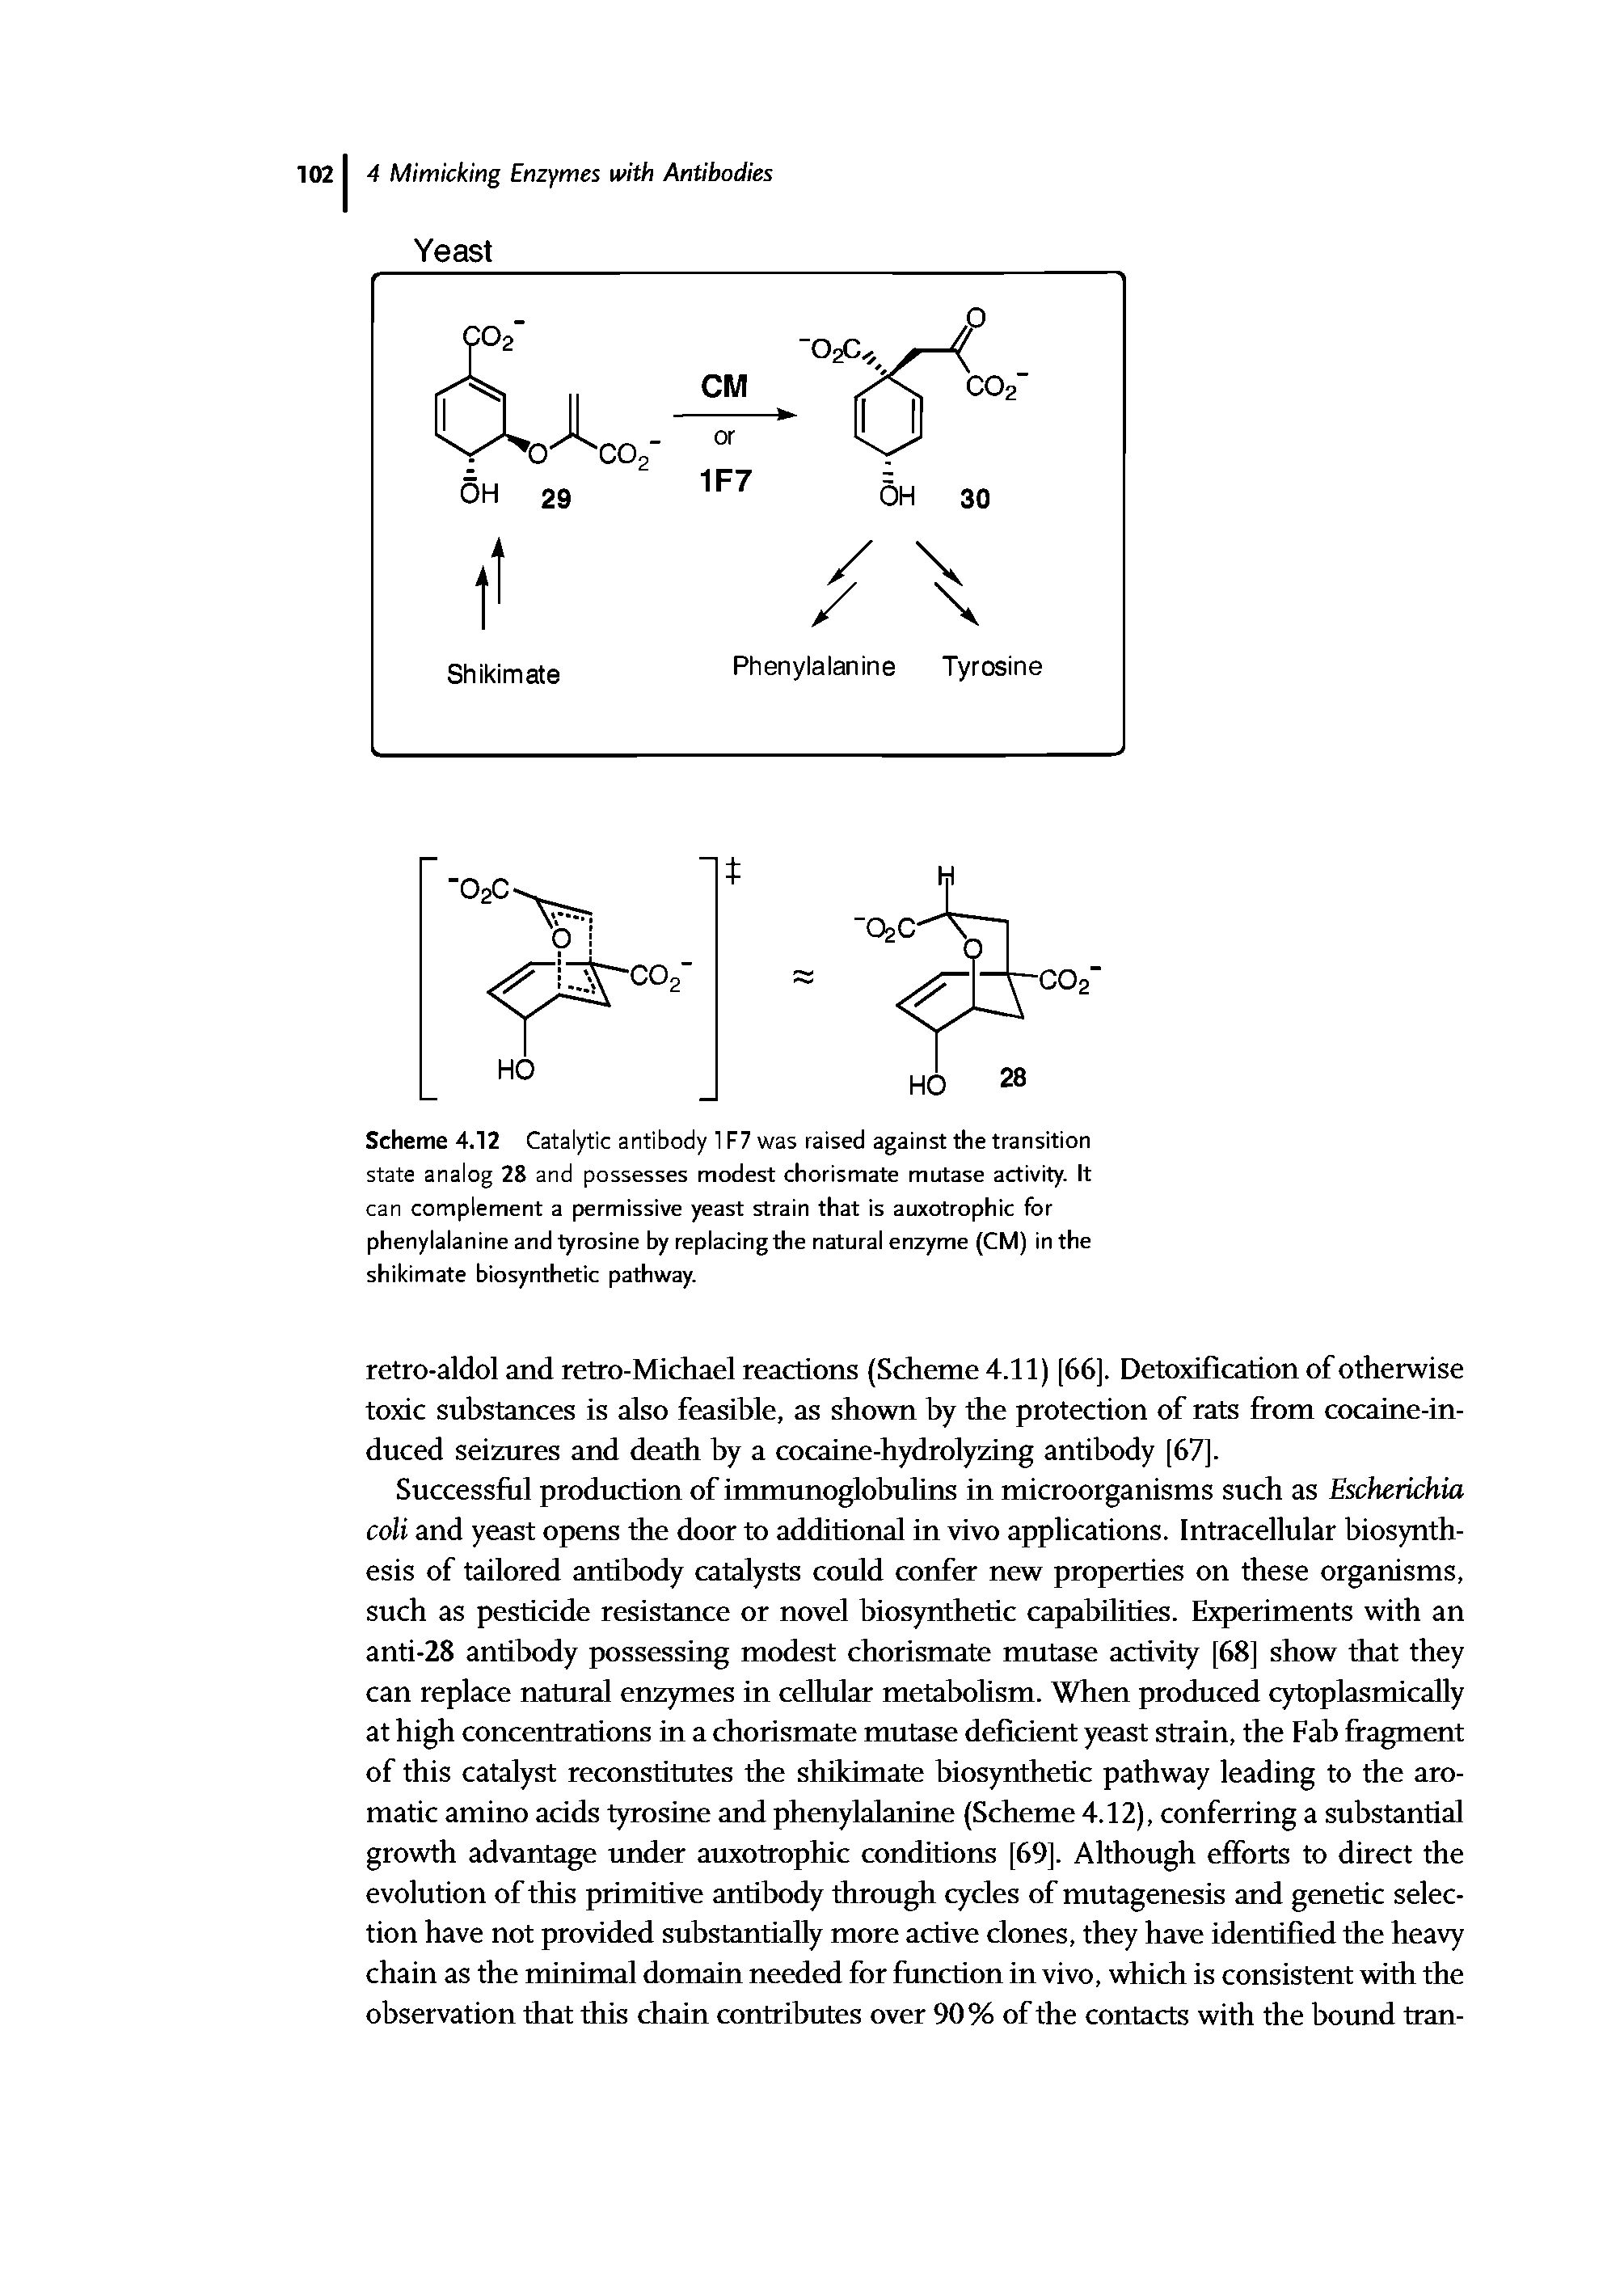 Scheme 4.12 Catalytic antibody 1F7 was raised against the transition state analog 28 and possesses modest chorismate mutase activity. It can complement a permissive yeast strain that is auxotrophic for phenylalanine and tyrosine by replacingthe natural enzyme (CM) in the shikimate biosynthetic pathway.